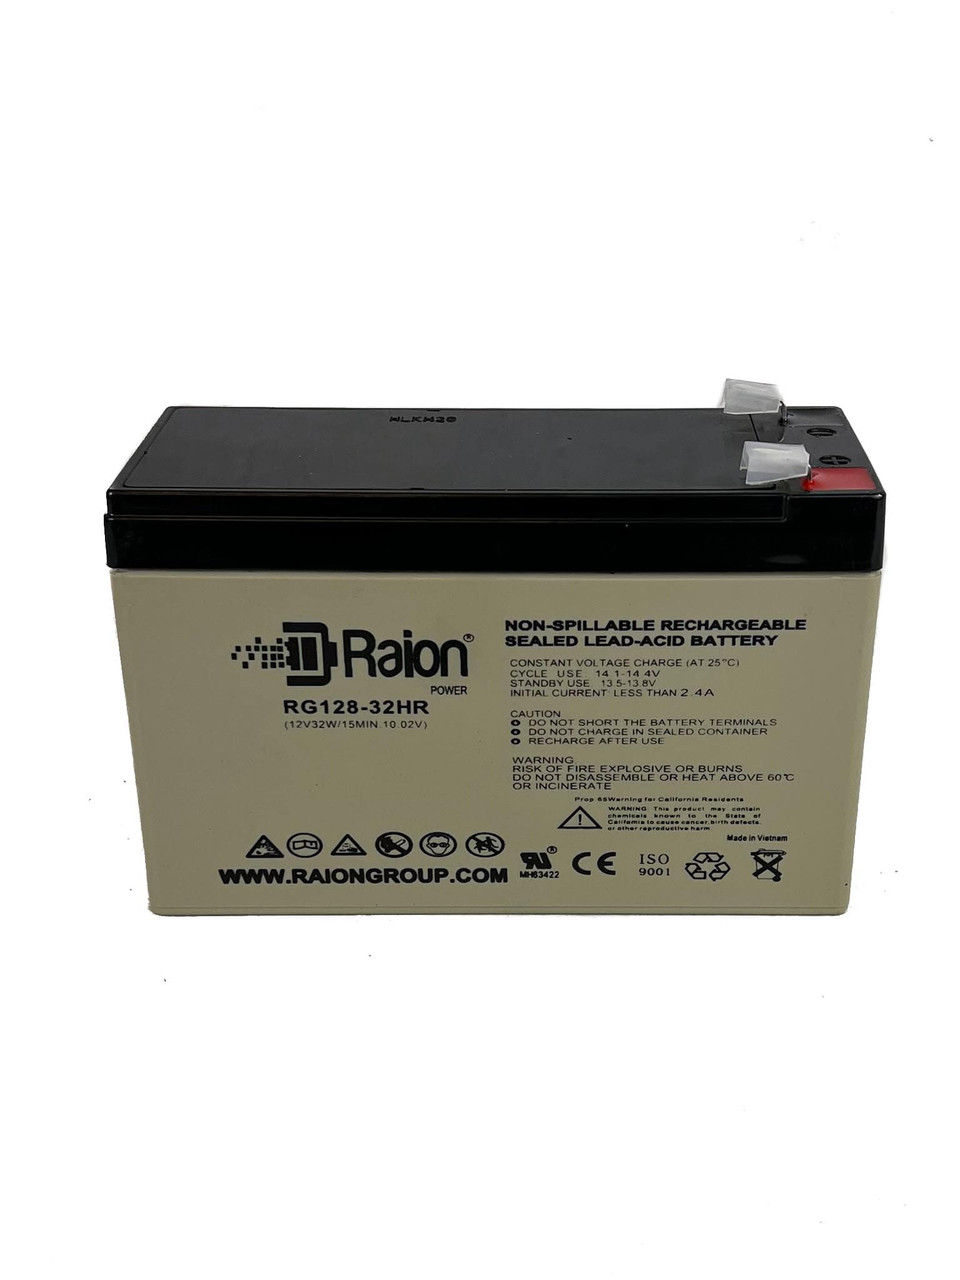 Raion Power 12V 7.5Ah UPS Battery With T2 Terminals For Alpha Technologies Pinnacle Plus 2000T (017-751-20)